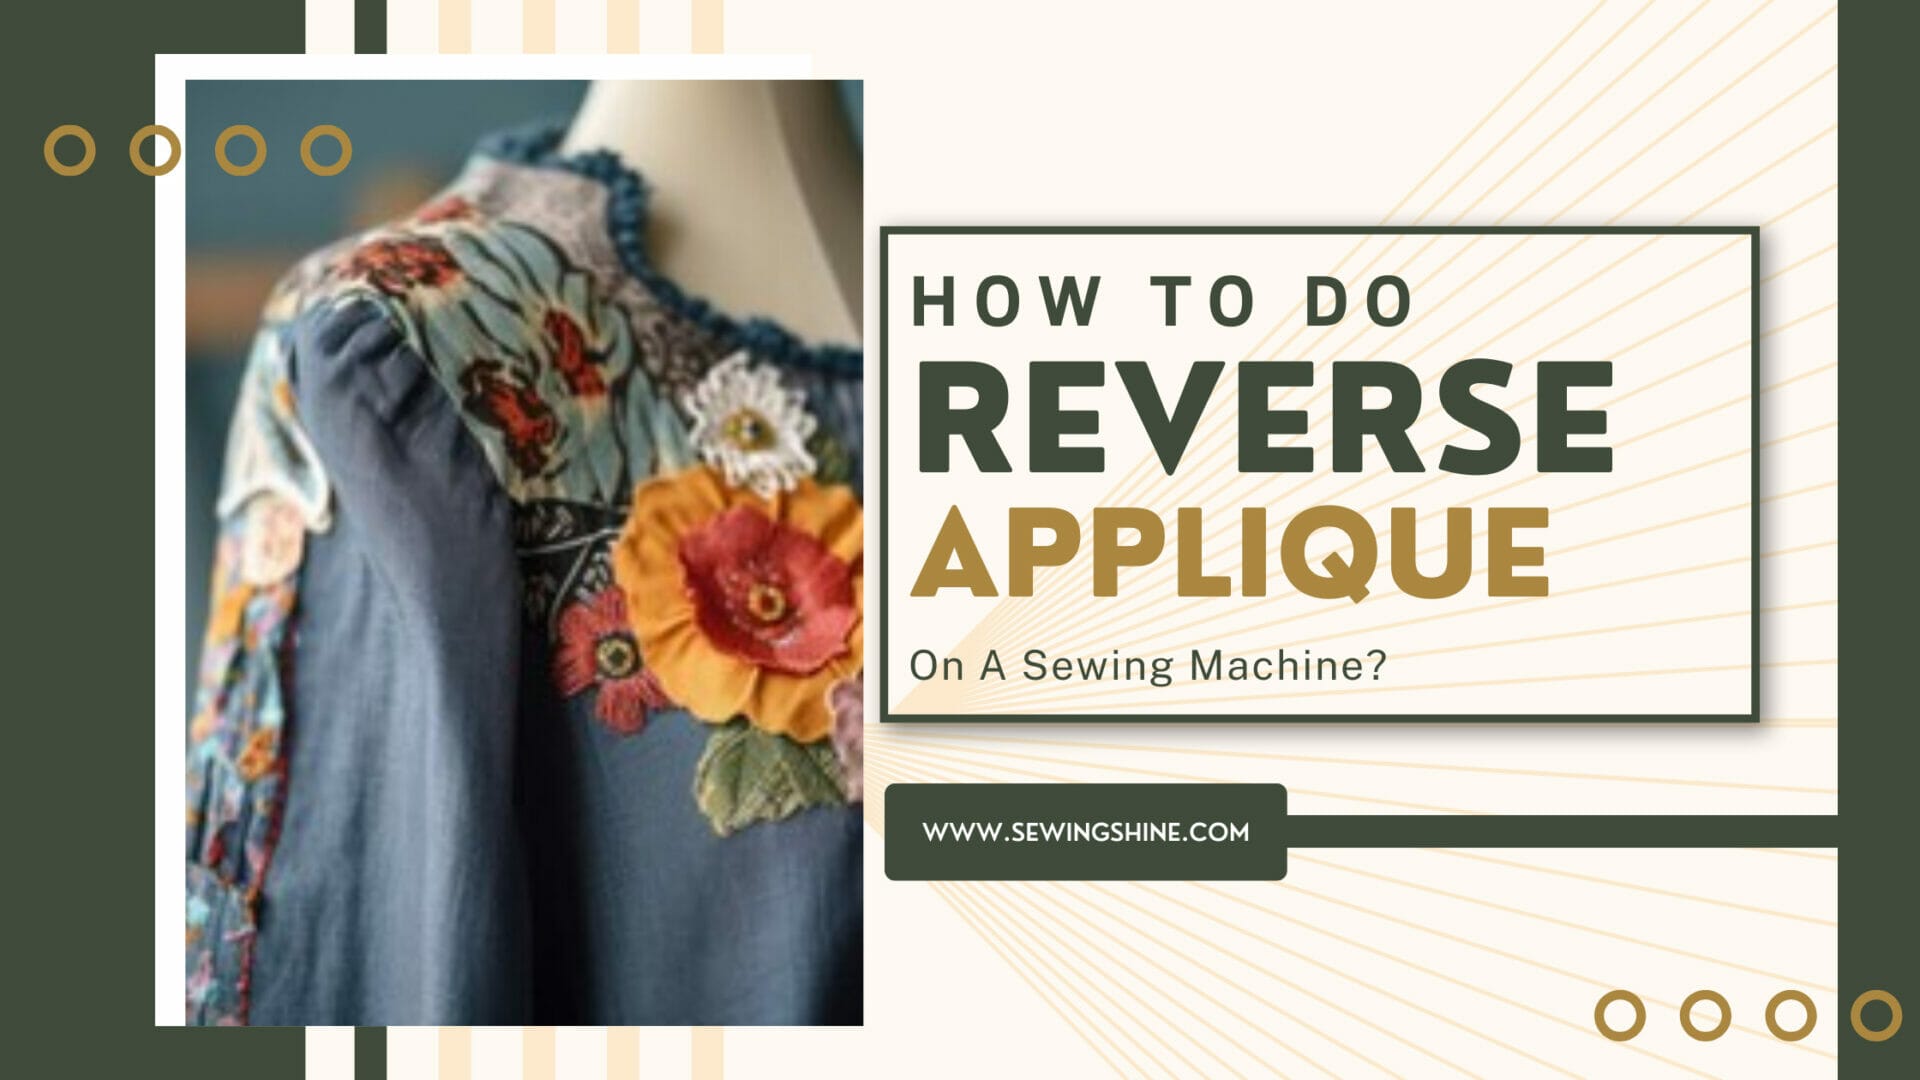 How To Do Reverse Applique On A Sewing Machine